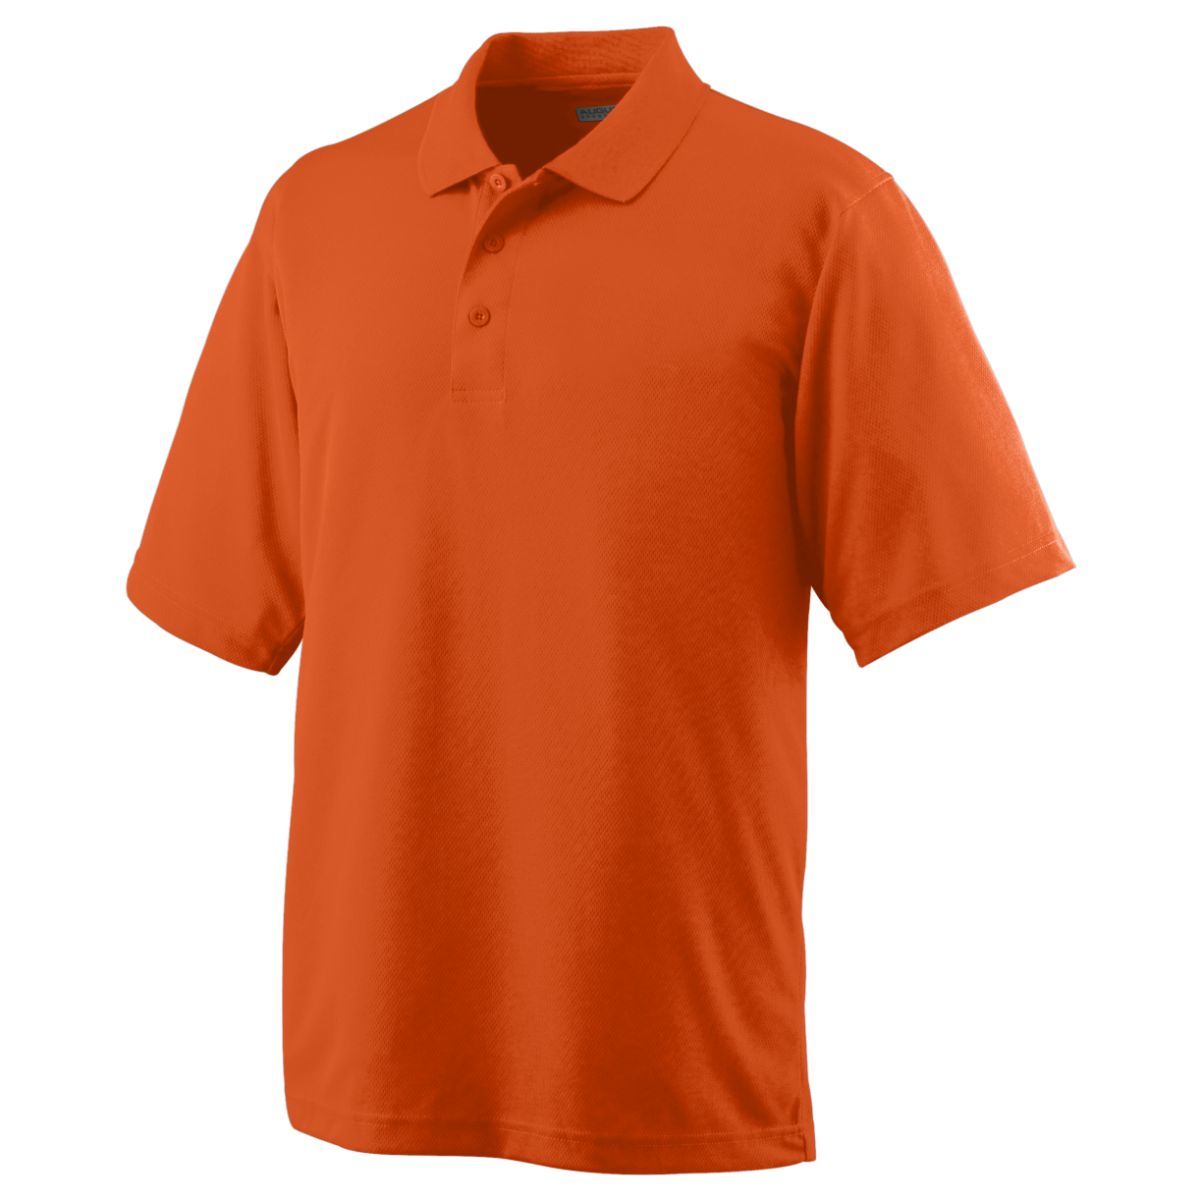 Augusta Sportswear Wicking Mesh Polo in Orange  -Part of the Adult, Adult-Polos, Polos, Augusta-Products, Tennis, Shirts product lines at KanaleyCreations.com